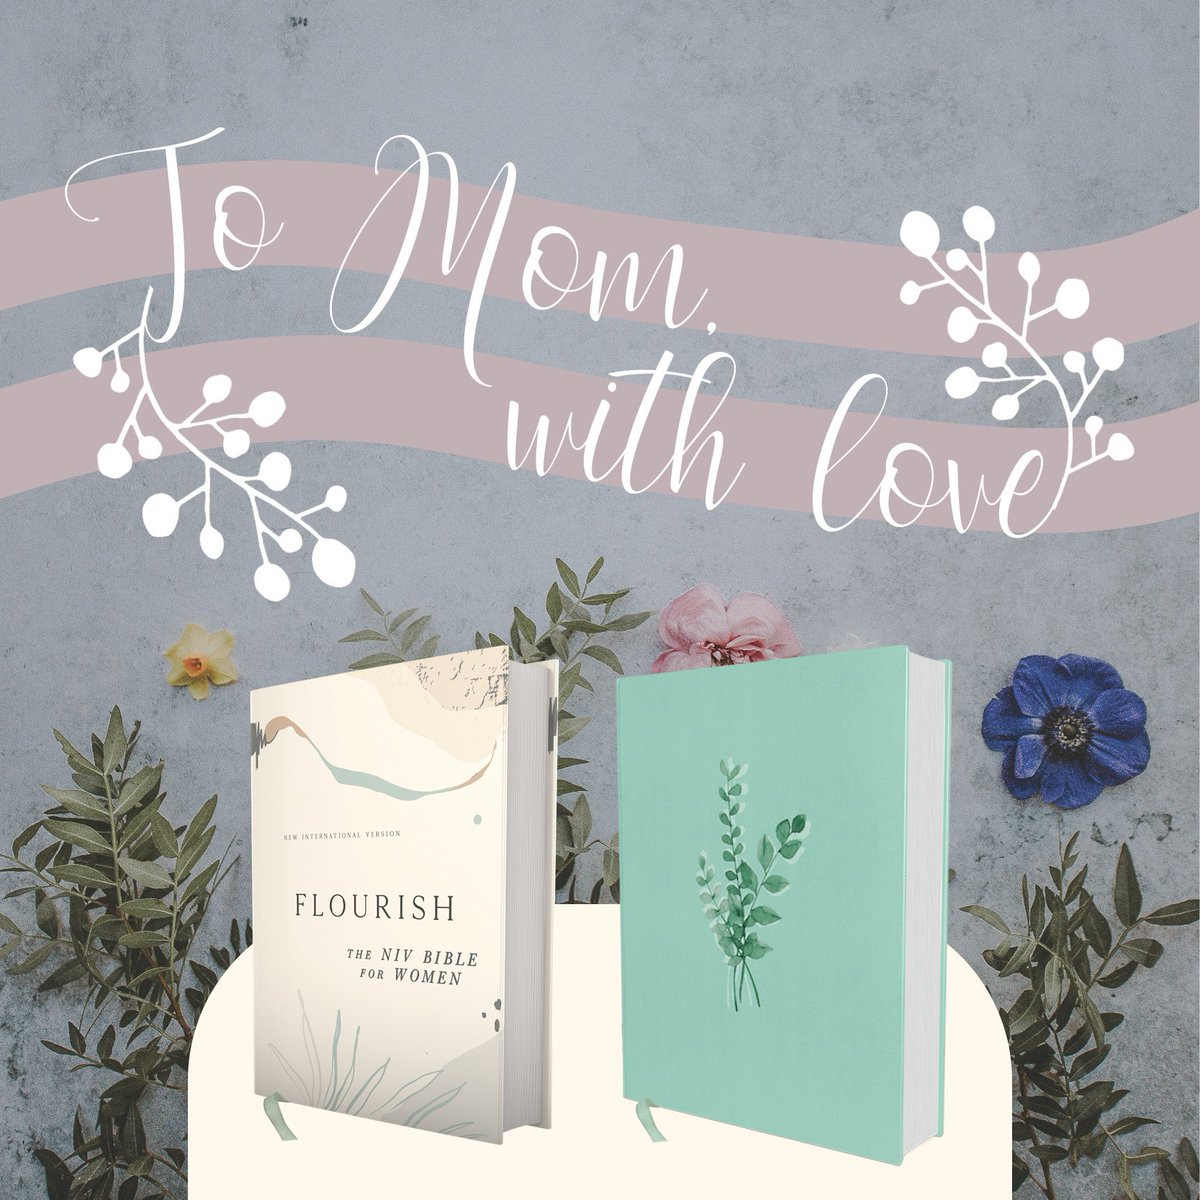 Mother’s Day is May 12! Give the special mom in your life the gift of spiritual growth (or add one to your own wish list!). Shop our selection of Bibles designed for women: bibl.es/3x1DnEN

#mothersday #bibles #biblestudy #giftsformom #happymothersday #biblesforwomen